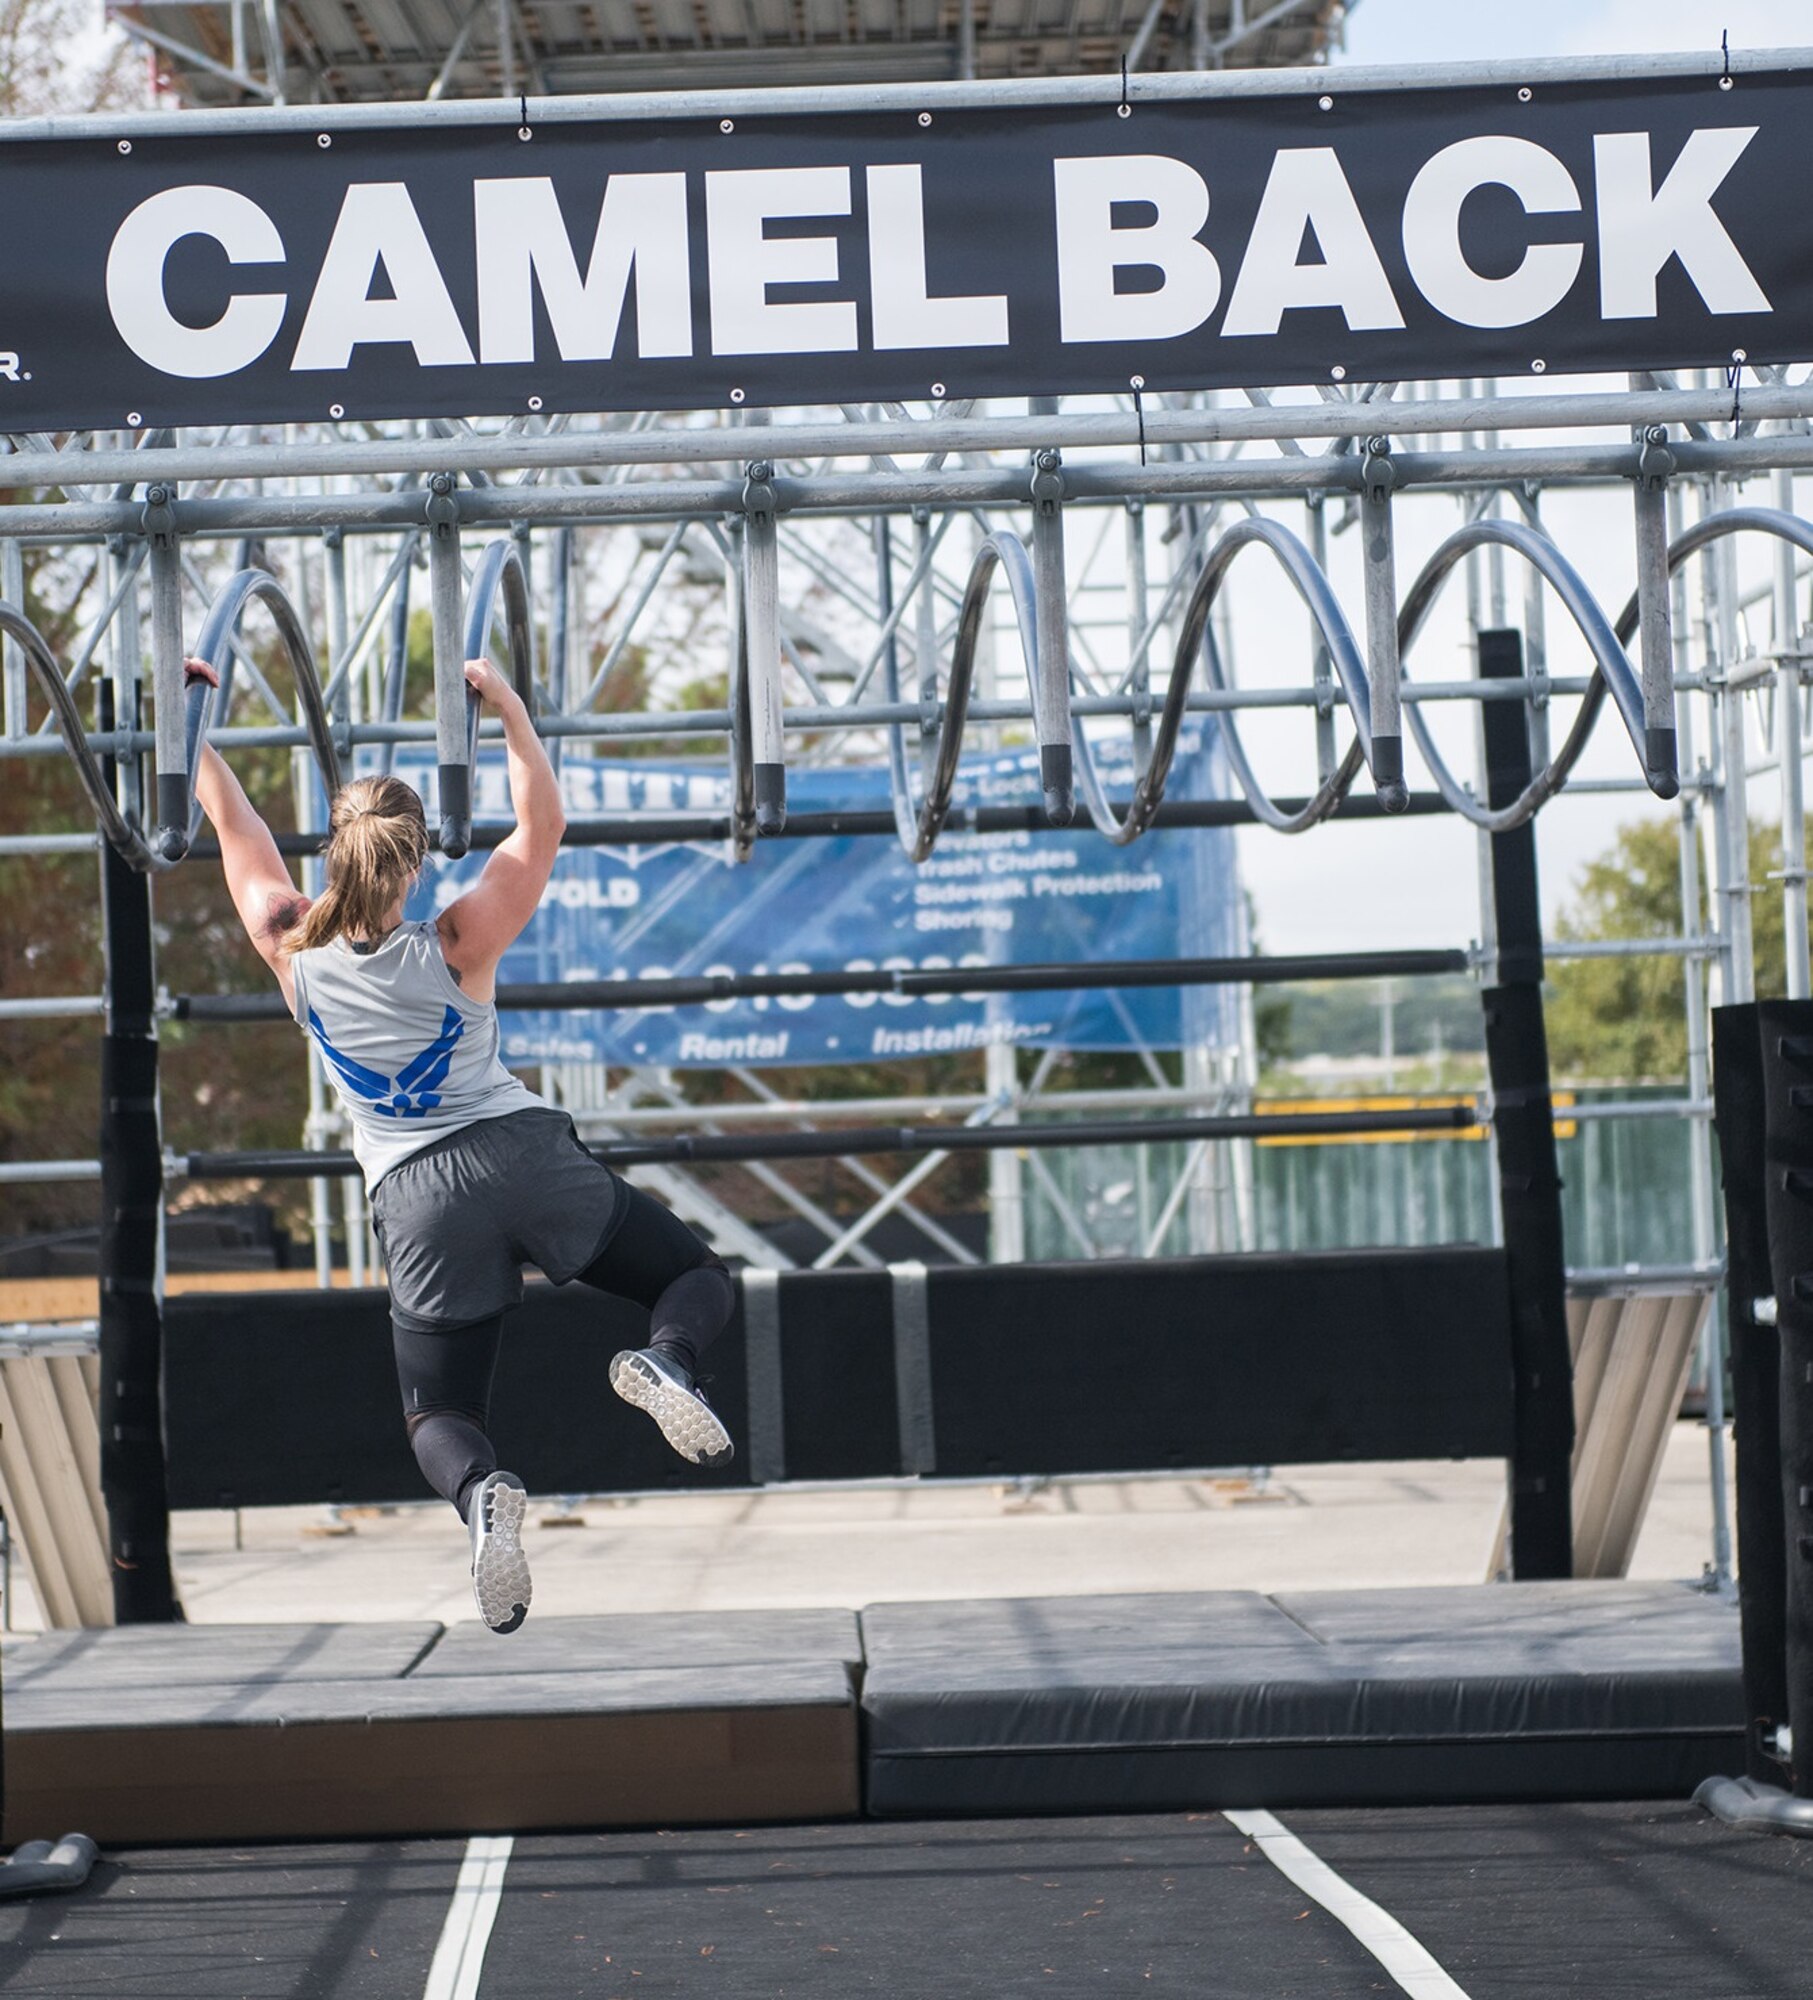 Staff Sgt. Tiffanie Sawatzke takes on the camel back obstacle during the 2019 Air Force Alpha Warrior Final Battle at Retama Park, Selma, Texas, Sept. 12, 2019. Air Force, Army and Navy military athletes competed against each other to determine the top three men and three women for each service. Those athletes make up the service teams that will go against each other during the 2019 Inter-Service Battle Sept. 14 at Retama. The Air Force partnered with Alpha Warrior three years ago to deliver functional fitness training to Airmen and their families.